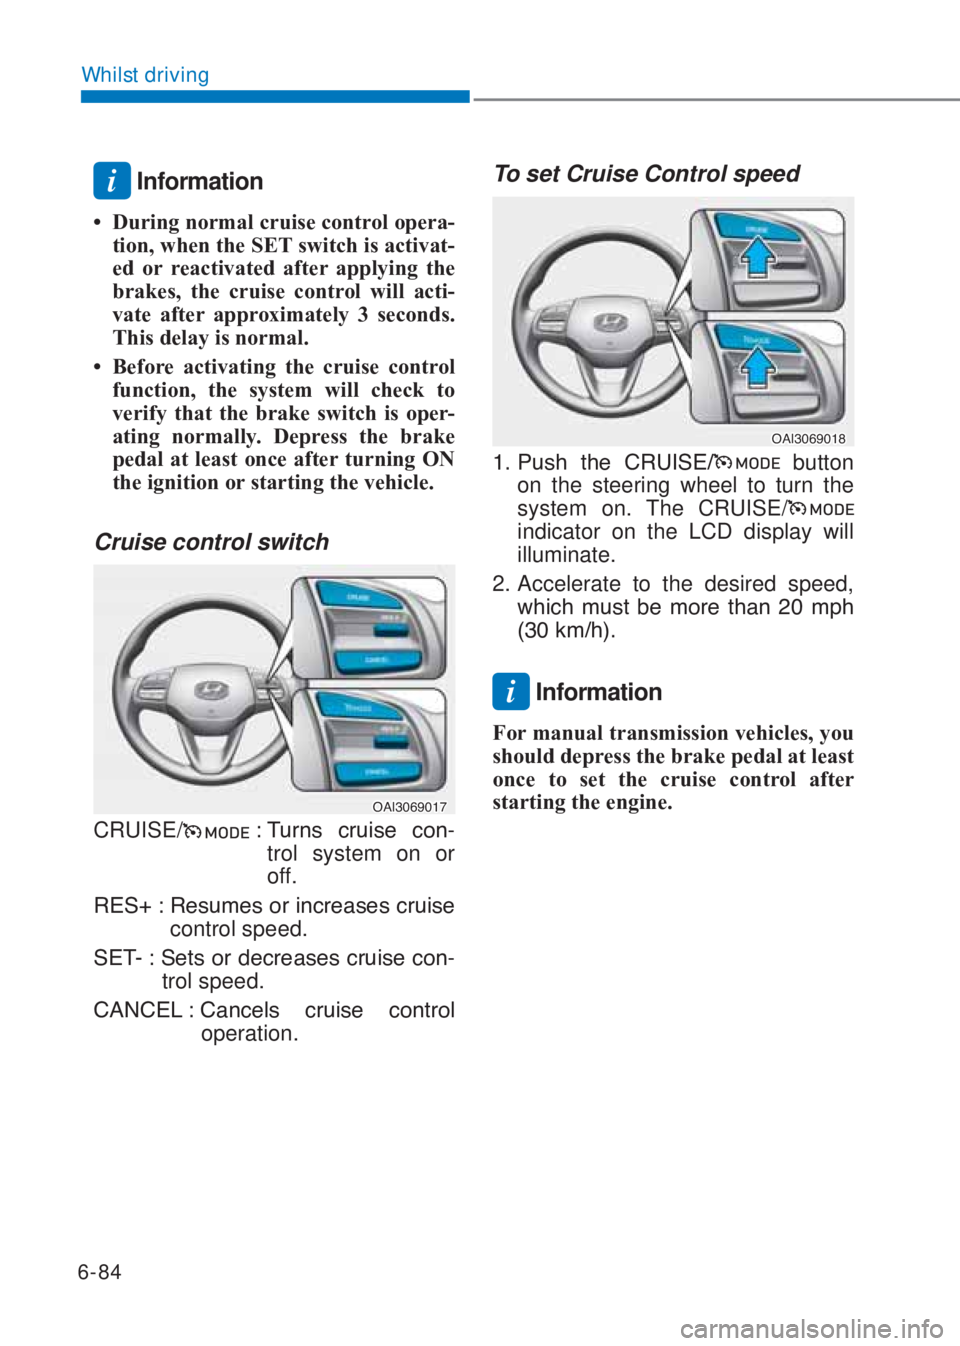 HYUNDAI I10 2022  Owners Manual 6-84
Whilst driving
i Information
�‡ �uring normal cruise control opera-
tion, when the SE�7 switch is activat-
ed or reactivated after applying the 
brakes, the cruise control will acti-
vate afte